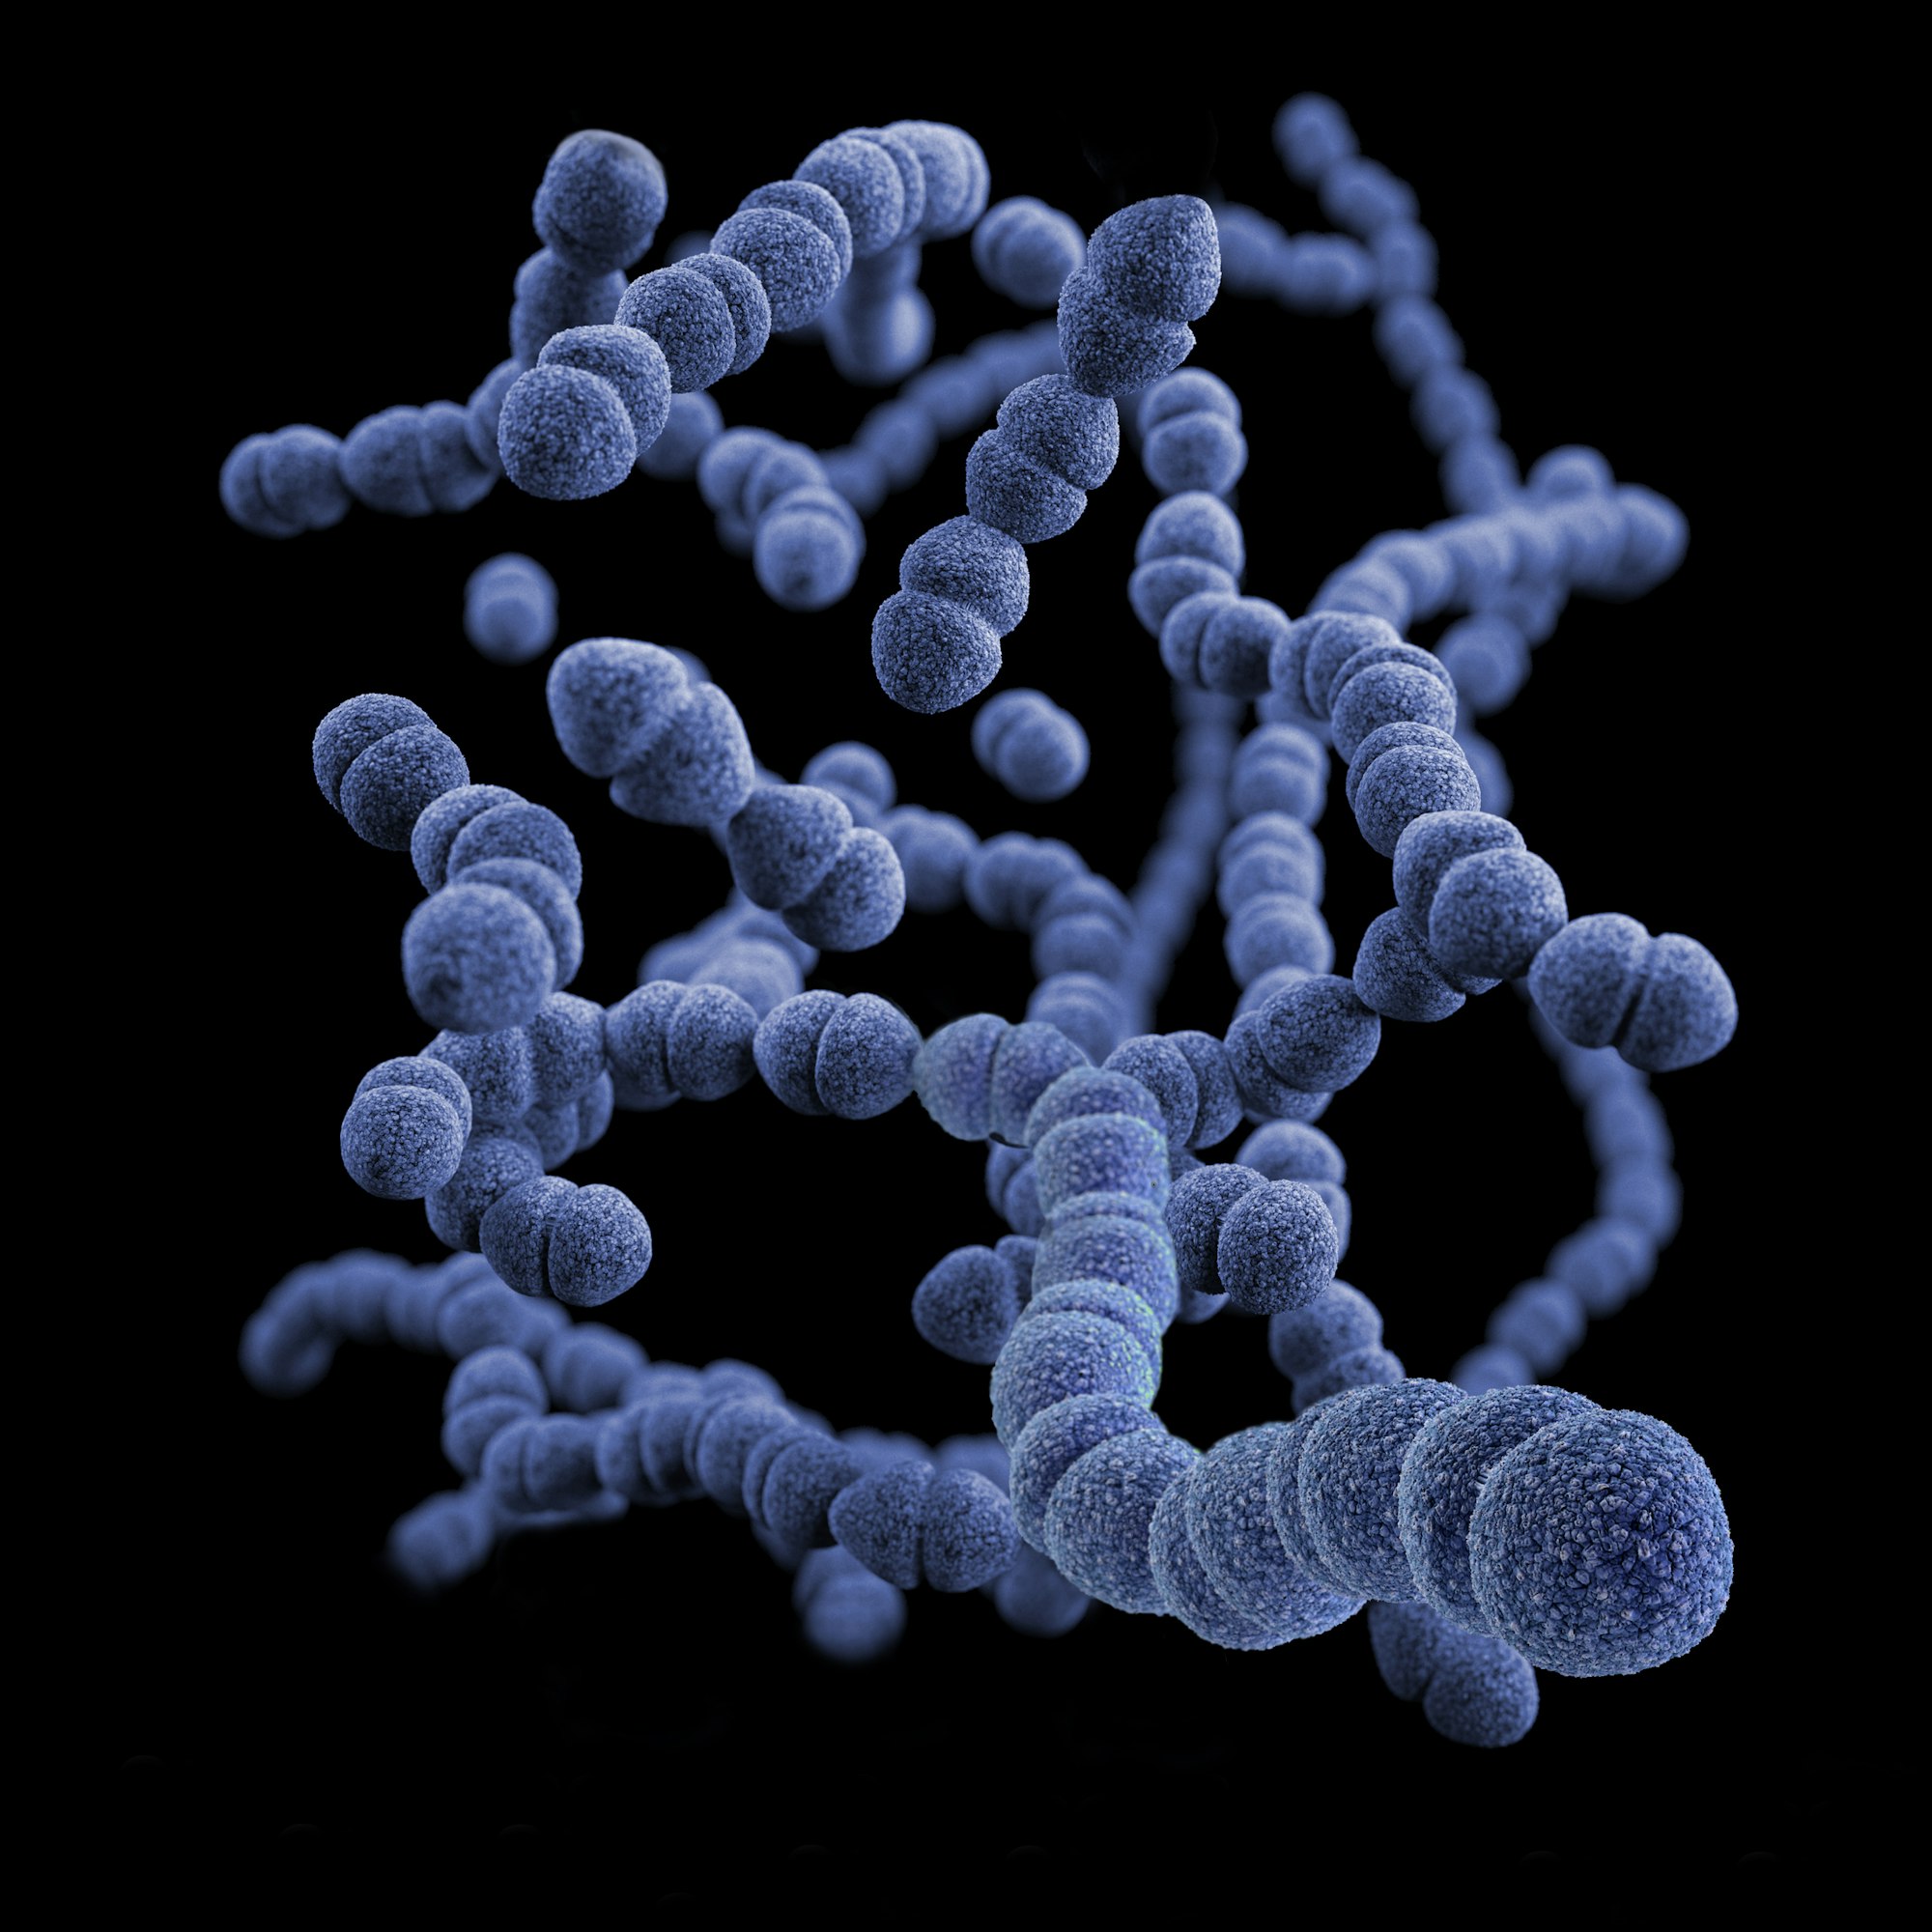 This illustration depicted a three-dimensional (3D), computer-generated image, of a group of Gram-positive, Streptococcus pneumoniae bacteria. The artistic recreation was based upon scanning electron microscopic (SEM) imagery.